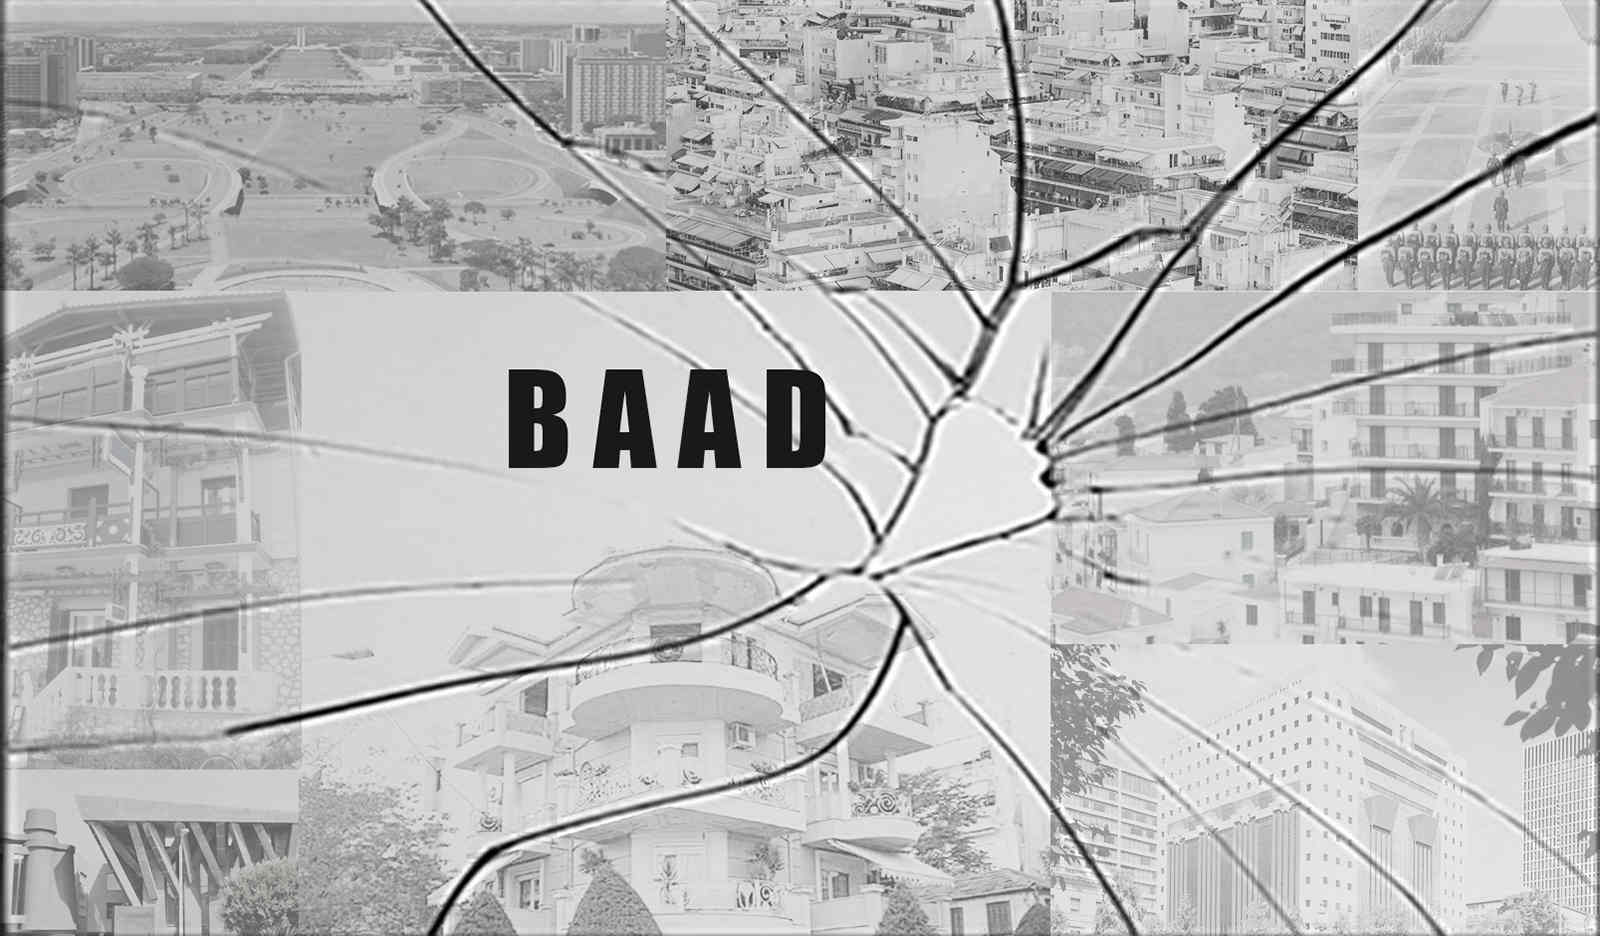 Archisearch BAAD | Article by Dr. Myrto Kostaropoulou